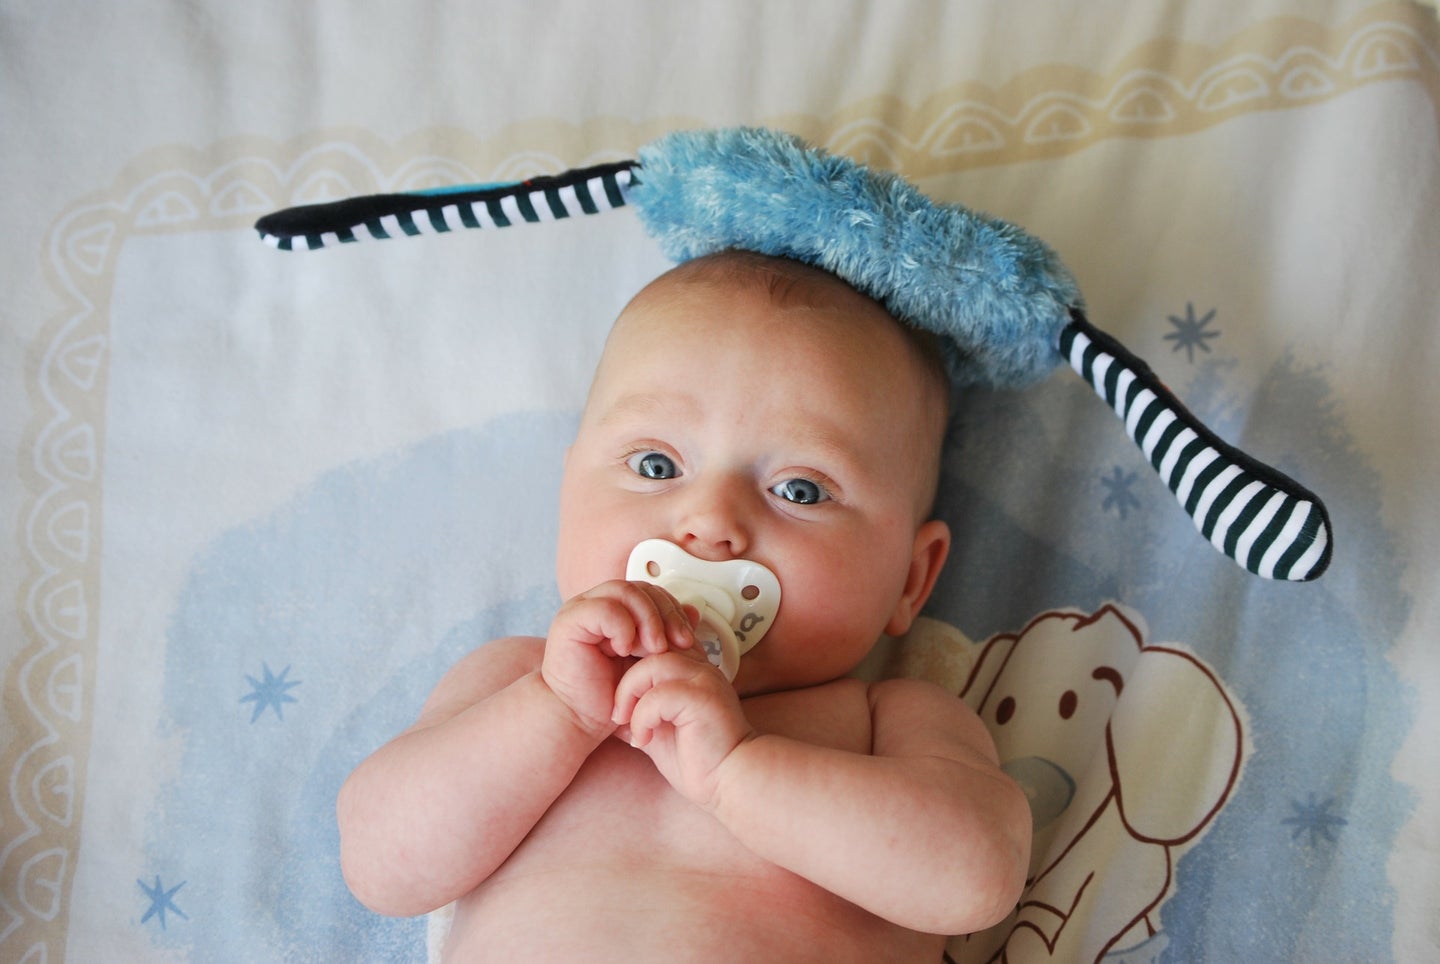 Cleaning your baby’s pacifier with spit might have surprising benefits